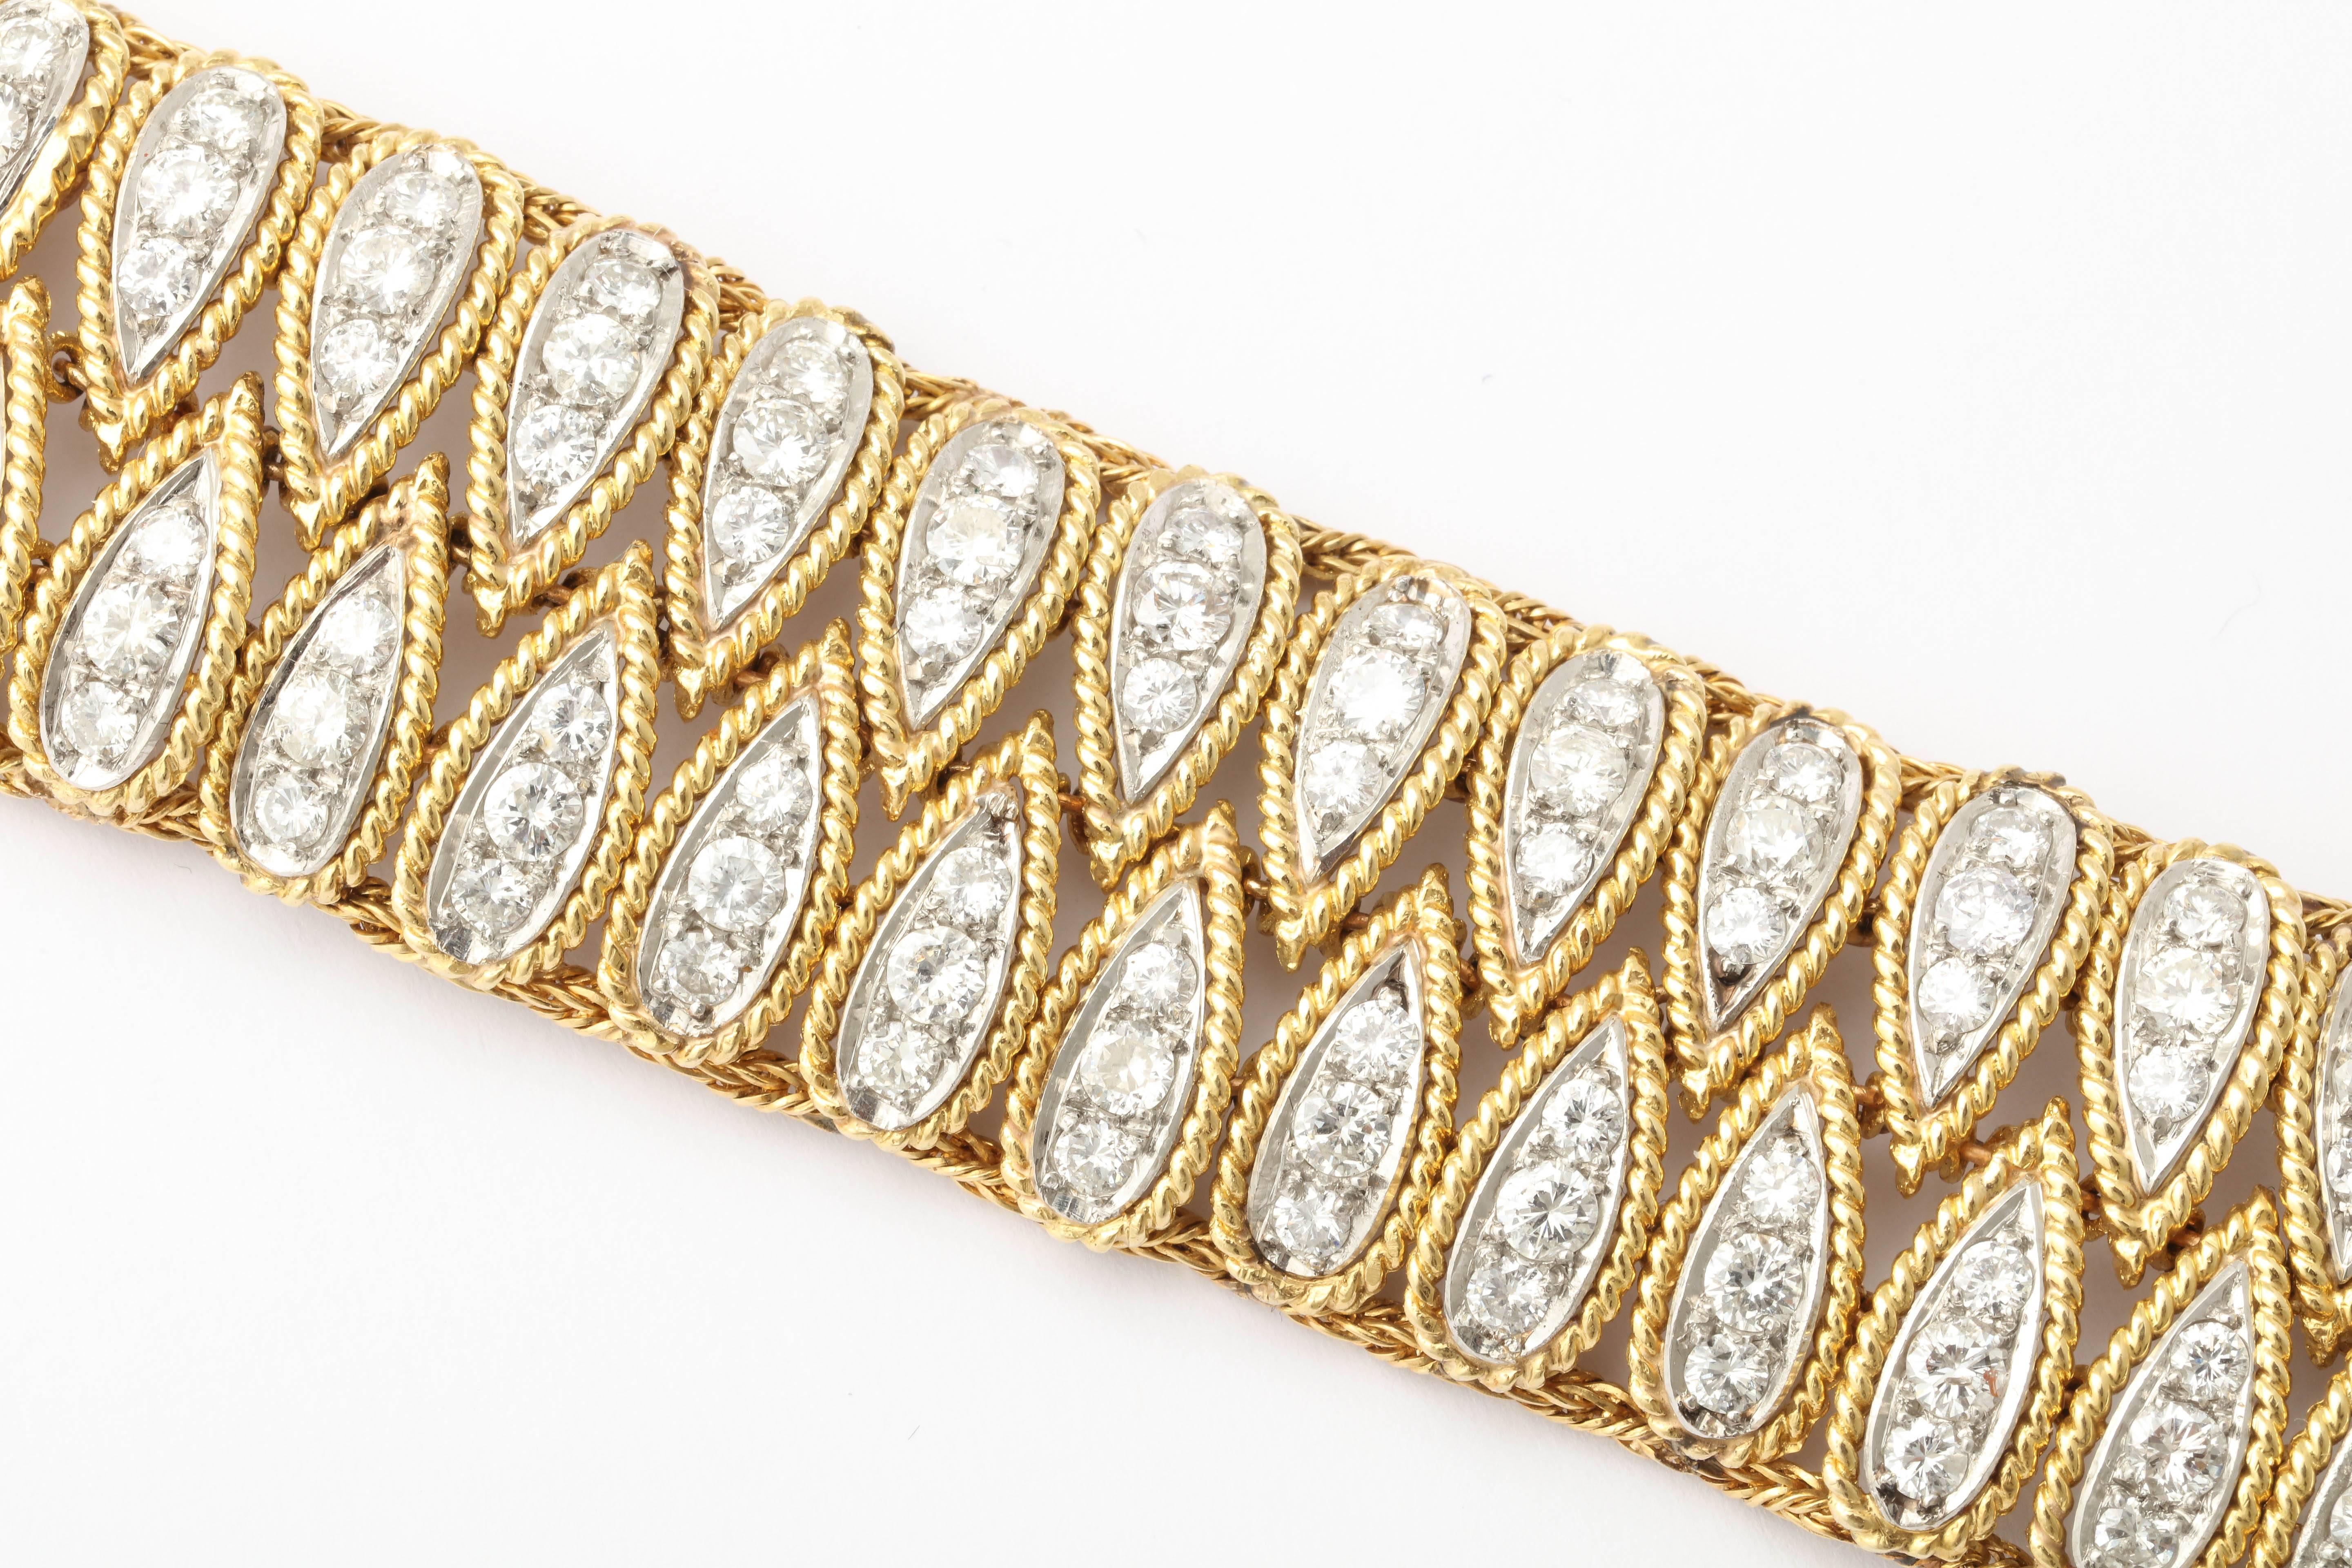 Handmade 18kt Yellow Gold & Diamond Bracelet with alternating segments of Pear shaped elements 150 full cut clean 7 white stones.  Well over 10cts  Very elegant and luxe. They don't make them like this anymore.